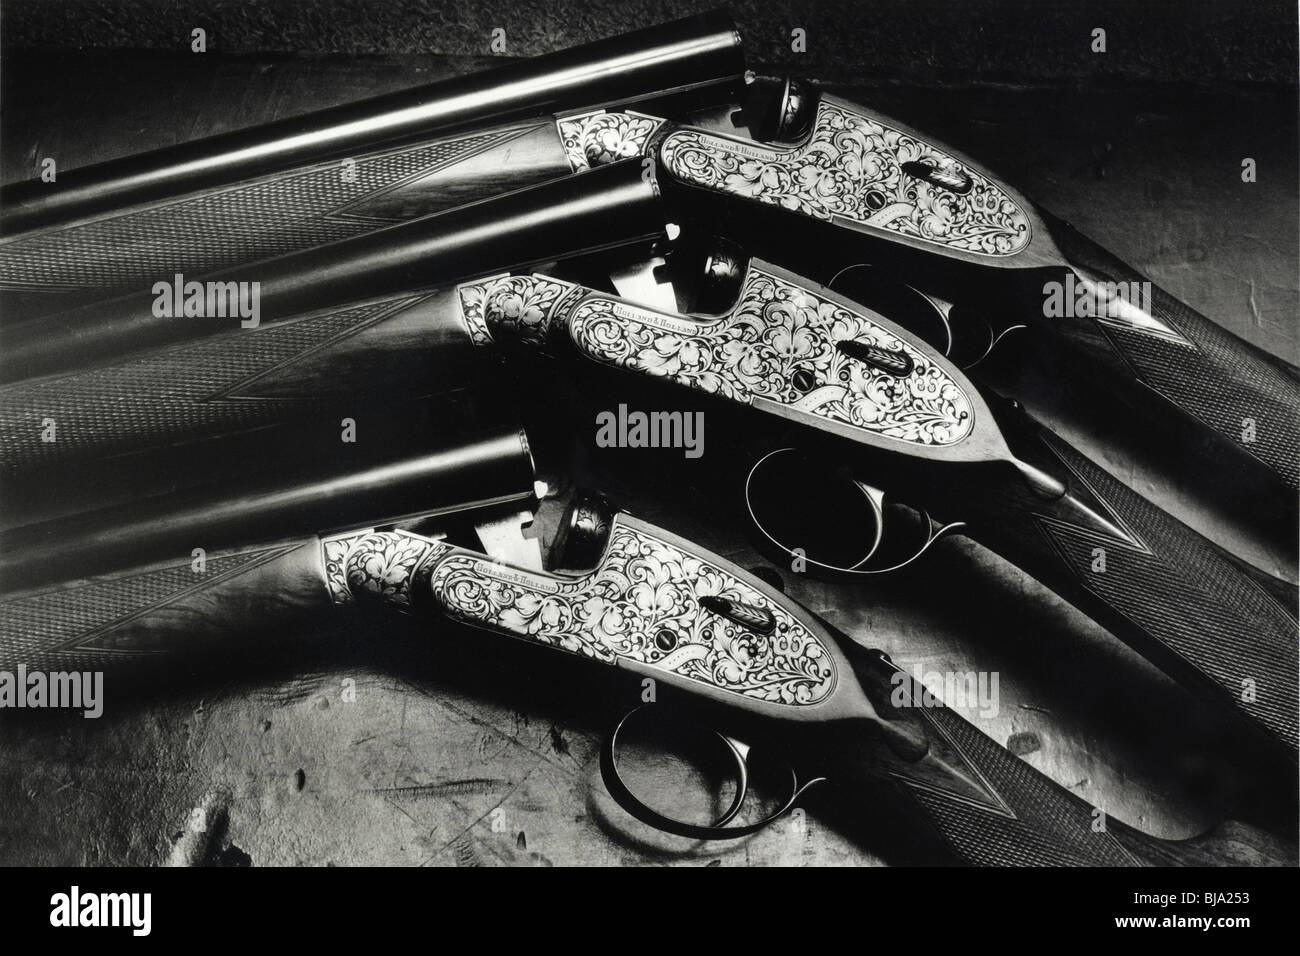 Valuable antique Holland and Holland gun stocks at an auction sale of sporting goods Stock Photo